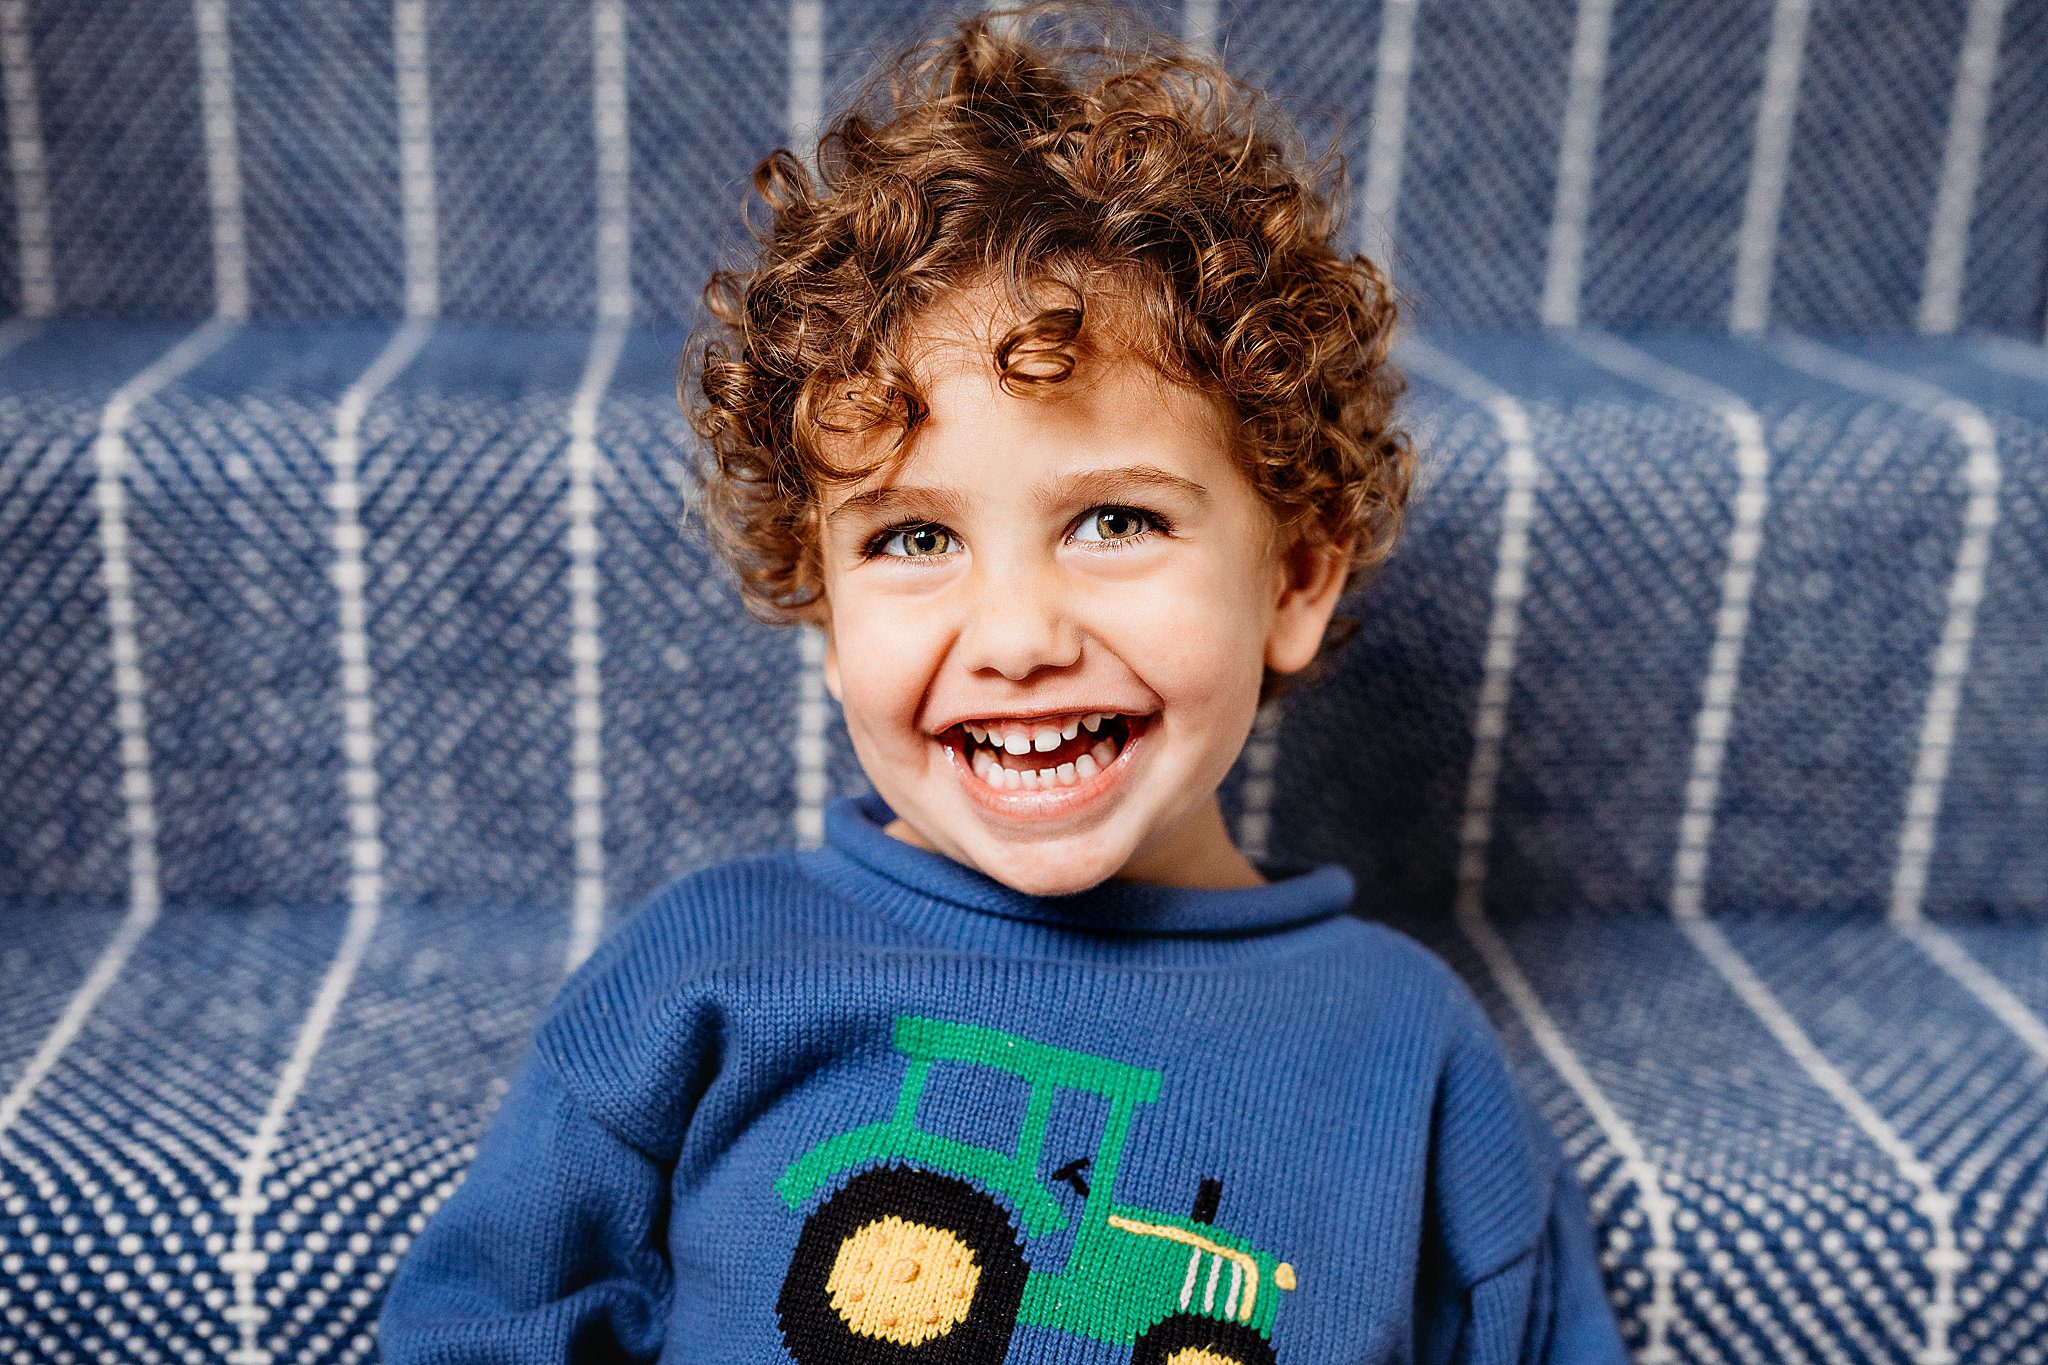 Boy with green eyes smiling - wearing a blue sweater - Boston Newborn and Family Photographer Helena Goessens Photography